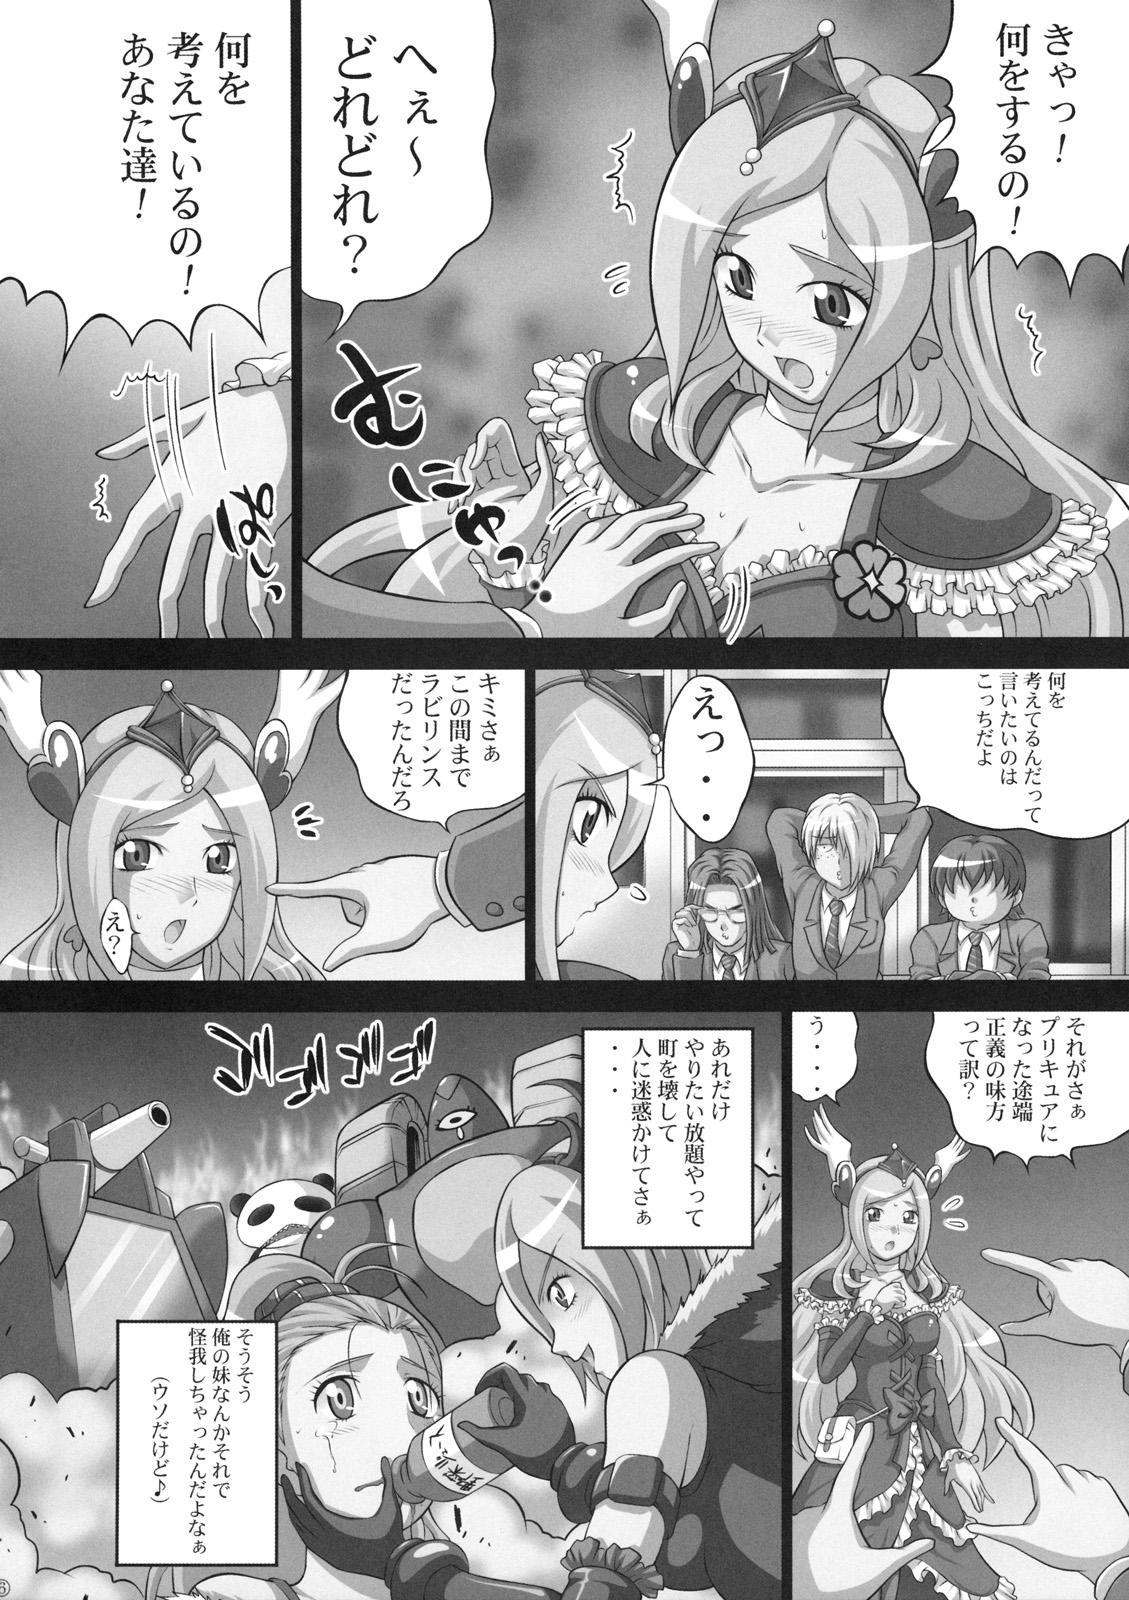 Gaping Kaikan Get Dayo 2 - Fresh precure French Porn - Page 7